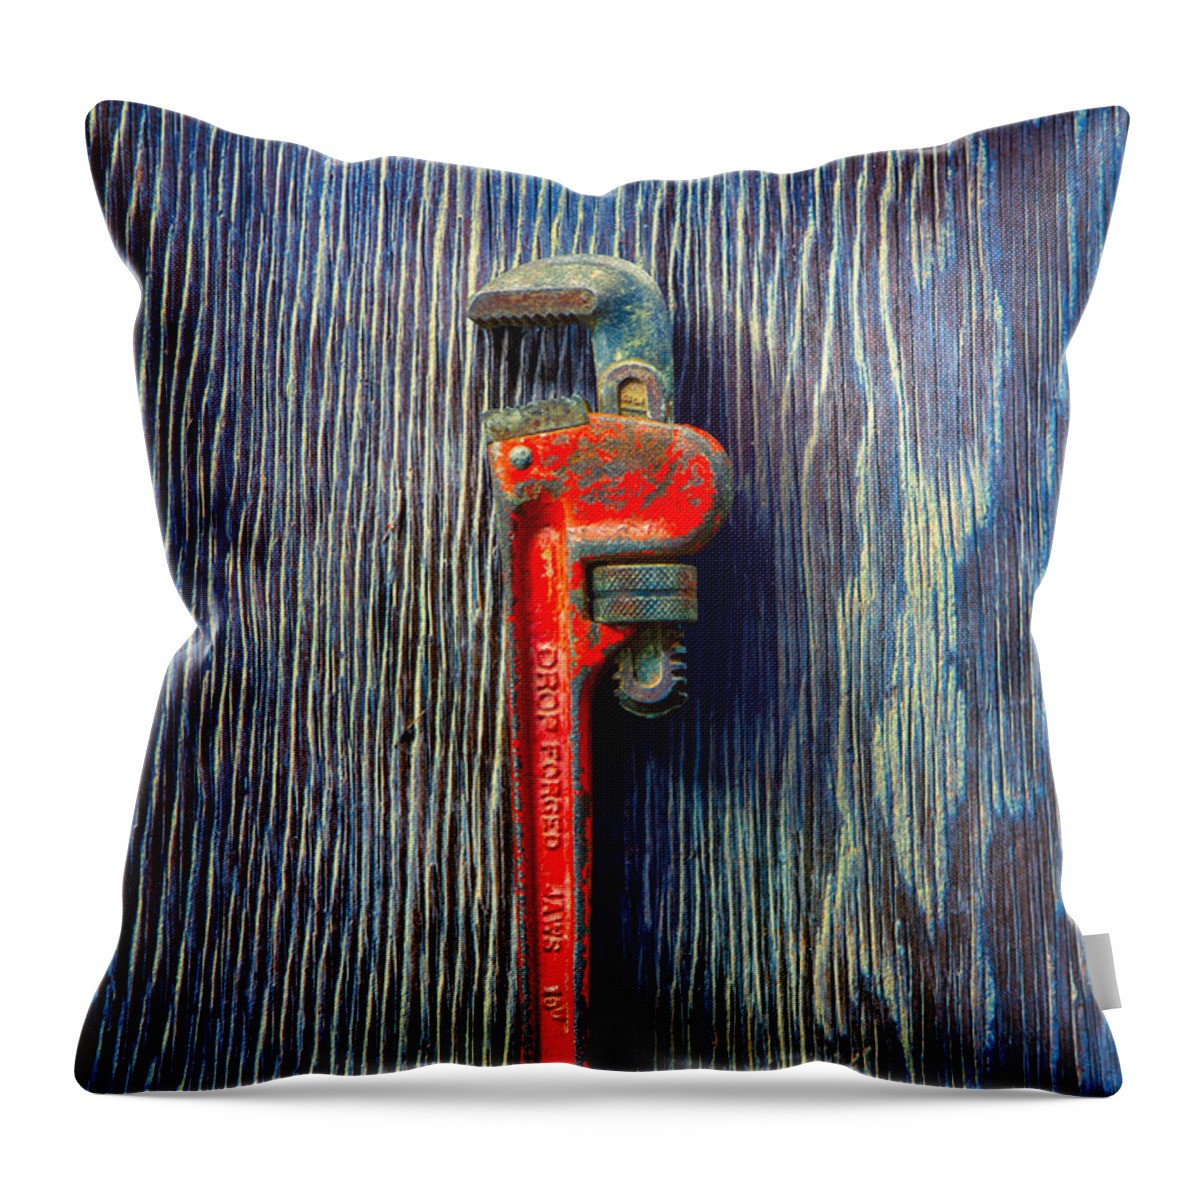 Antique Throw Pillow featuring the photograph Tools On Wood 62 by YoPedro